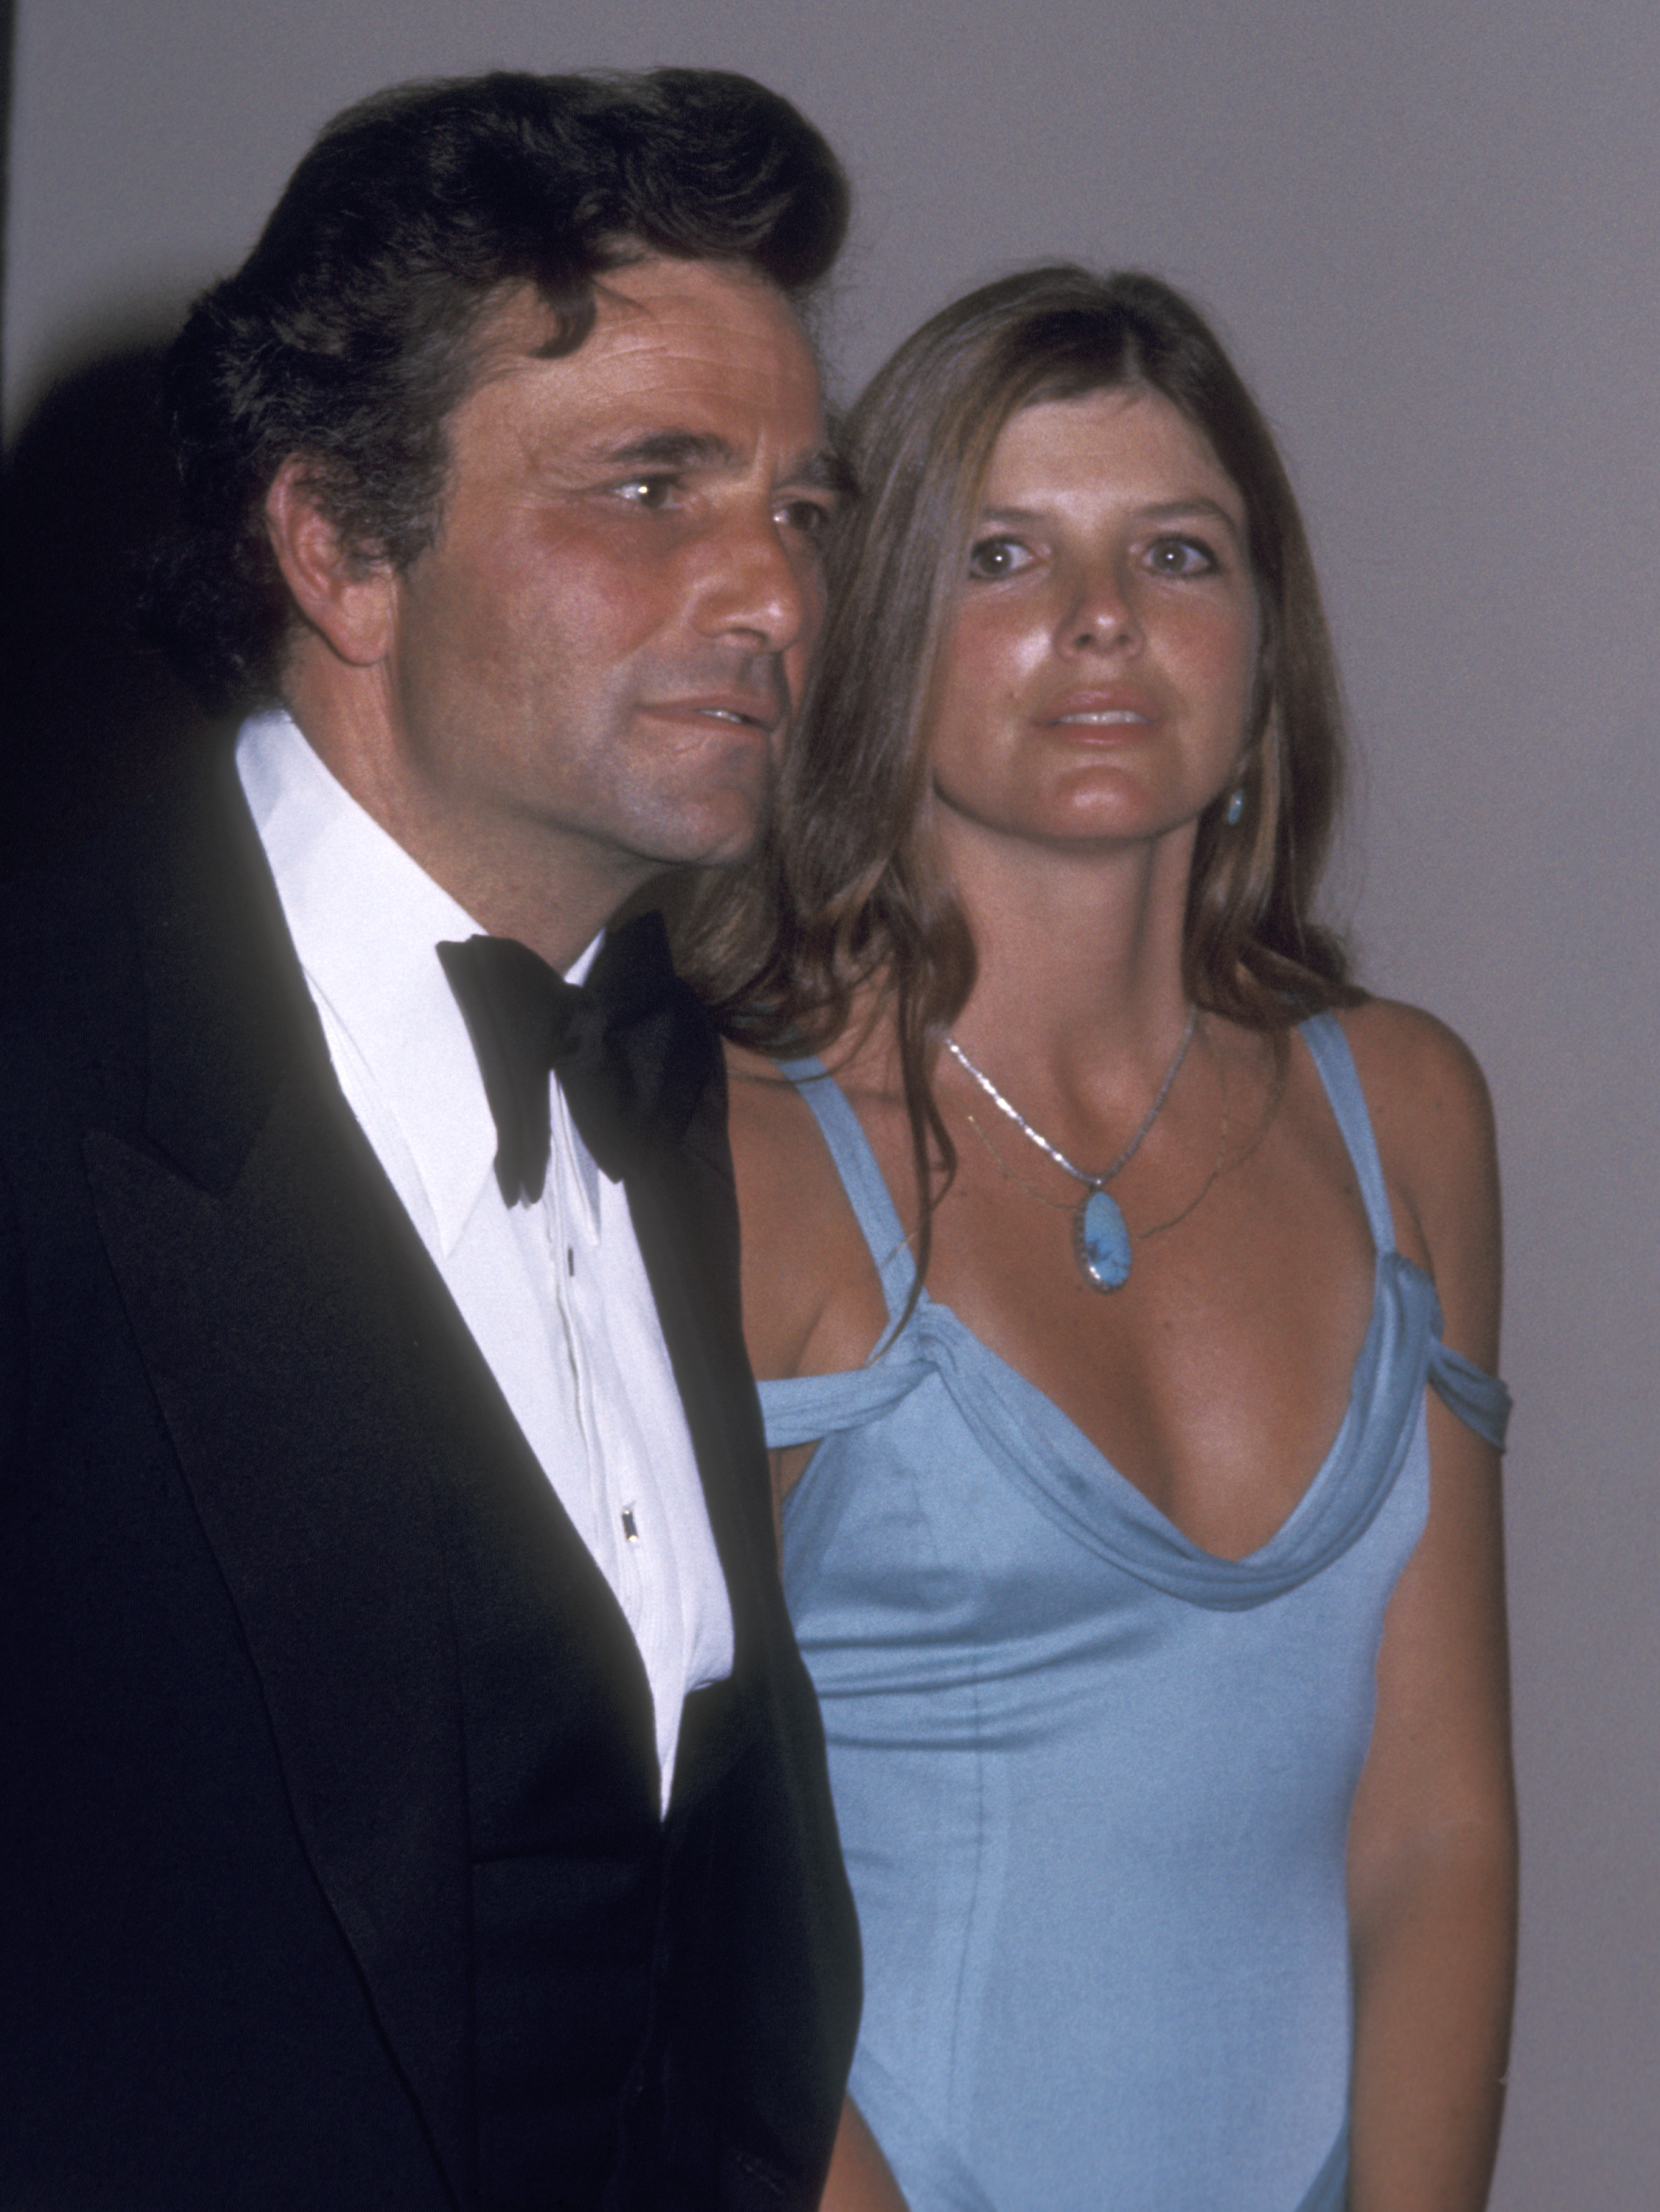 Actor Peter Falk and Katherine Ross attend 47th Annual Academy Awards on April 8, 1975 at the Dorothy Chandler Pavilion in Los Angeles, California. | Source: Getty Images